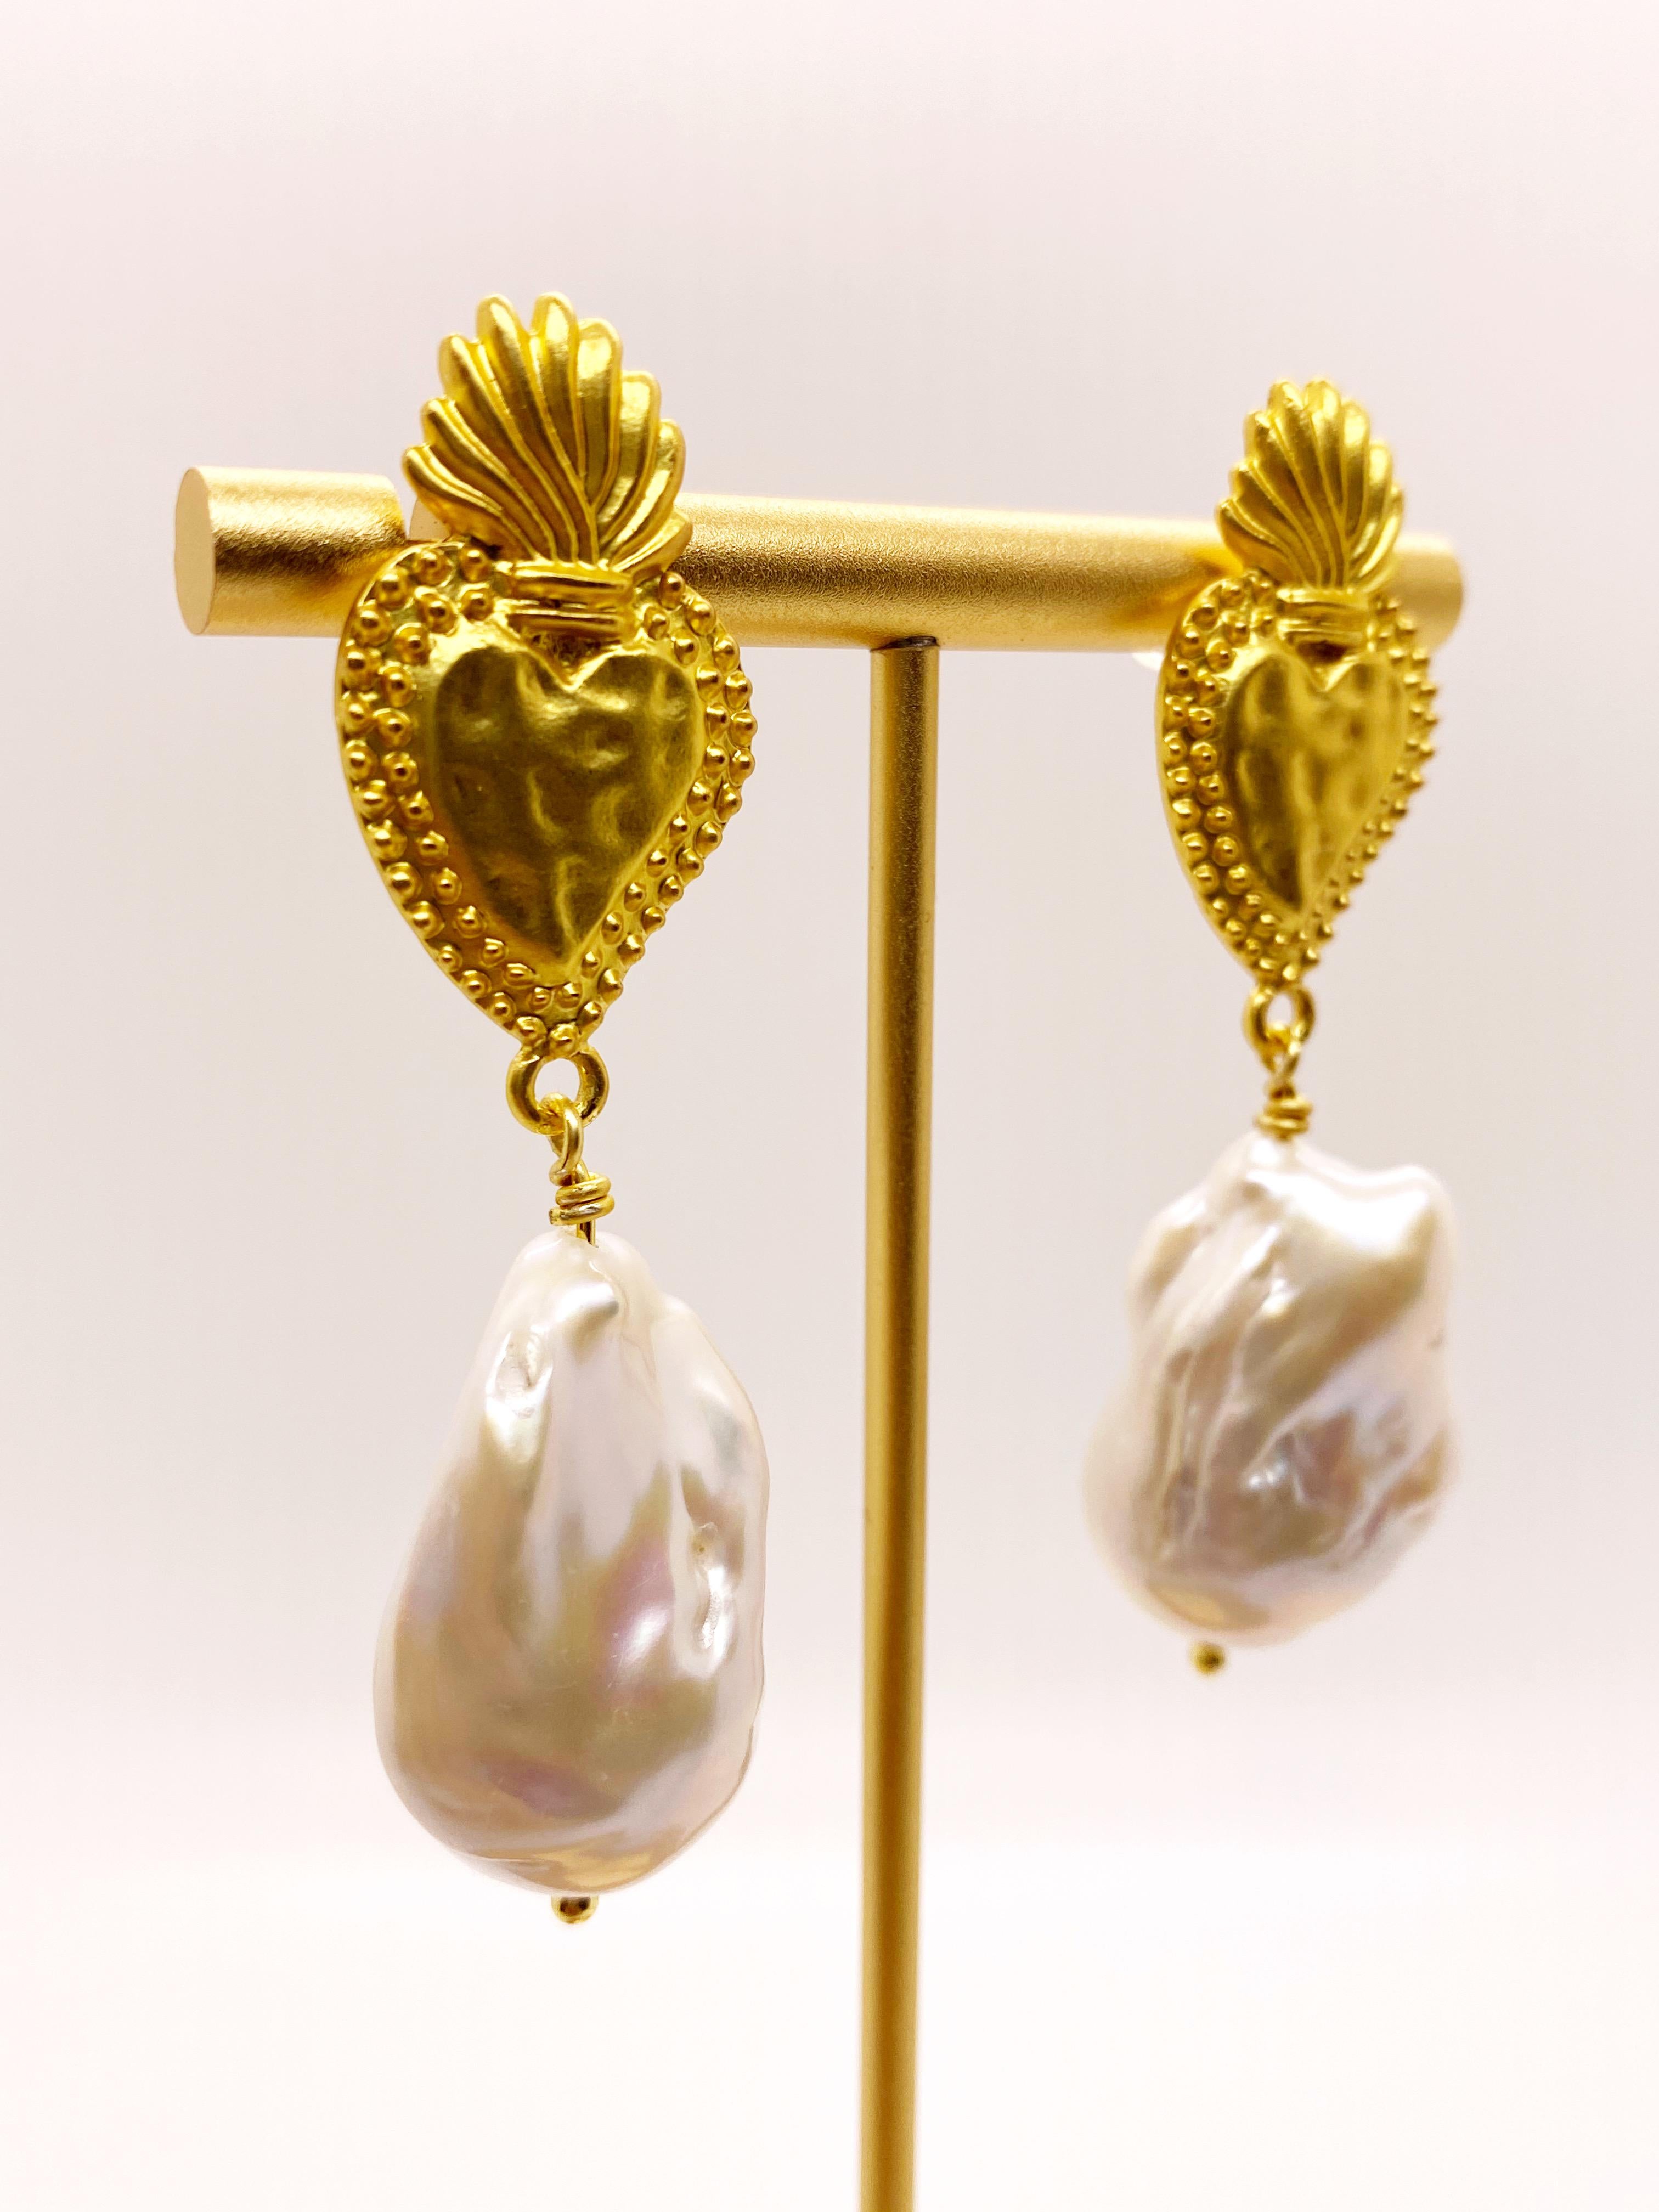 A large white freshwater baroque flame ball pearl hangs on a gold plated Milagrosa earring post. Size & shape of pearls may vary slightly as they are natural pearls. Statement earrings.

*Our jewelry have maximum protection for anti-tarnish and is